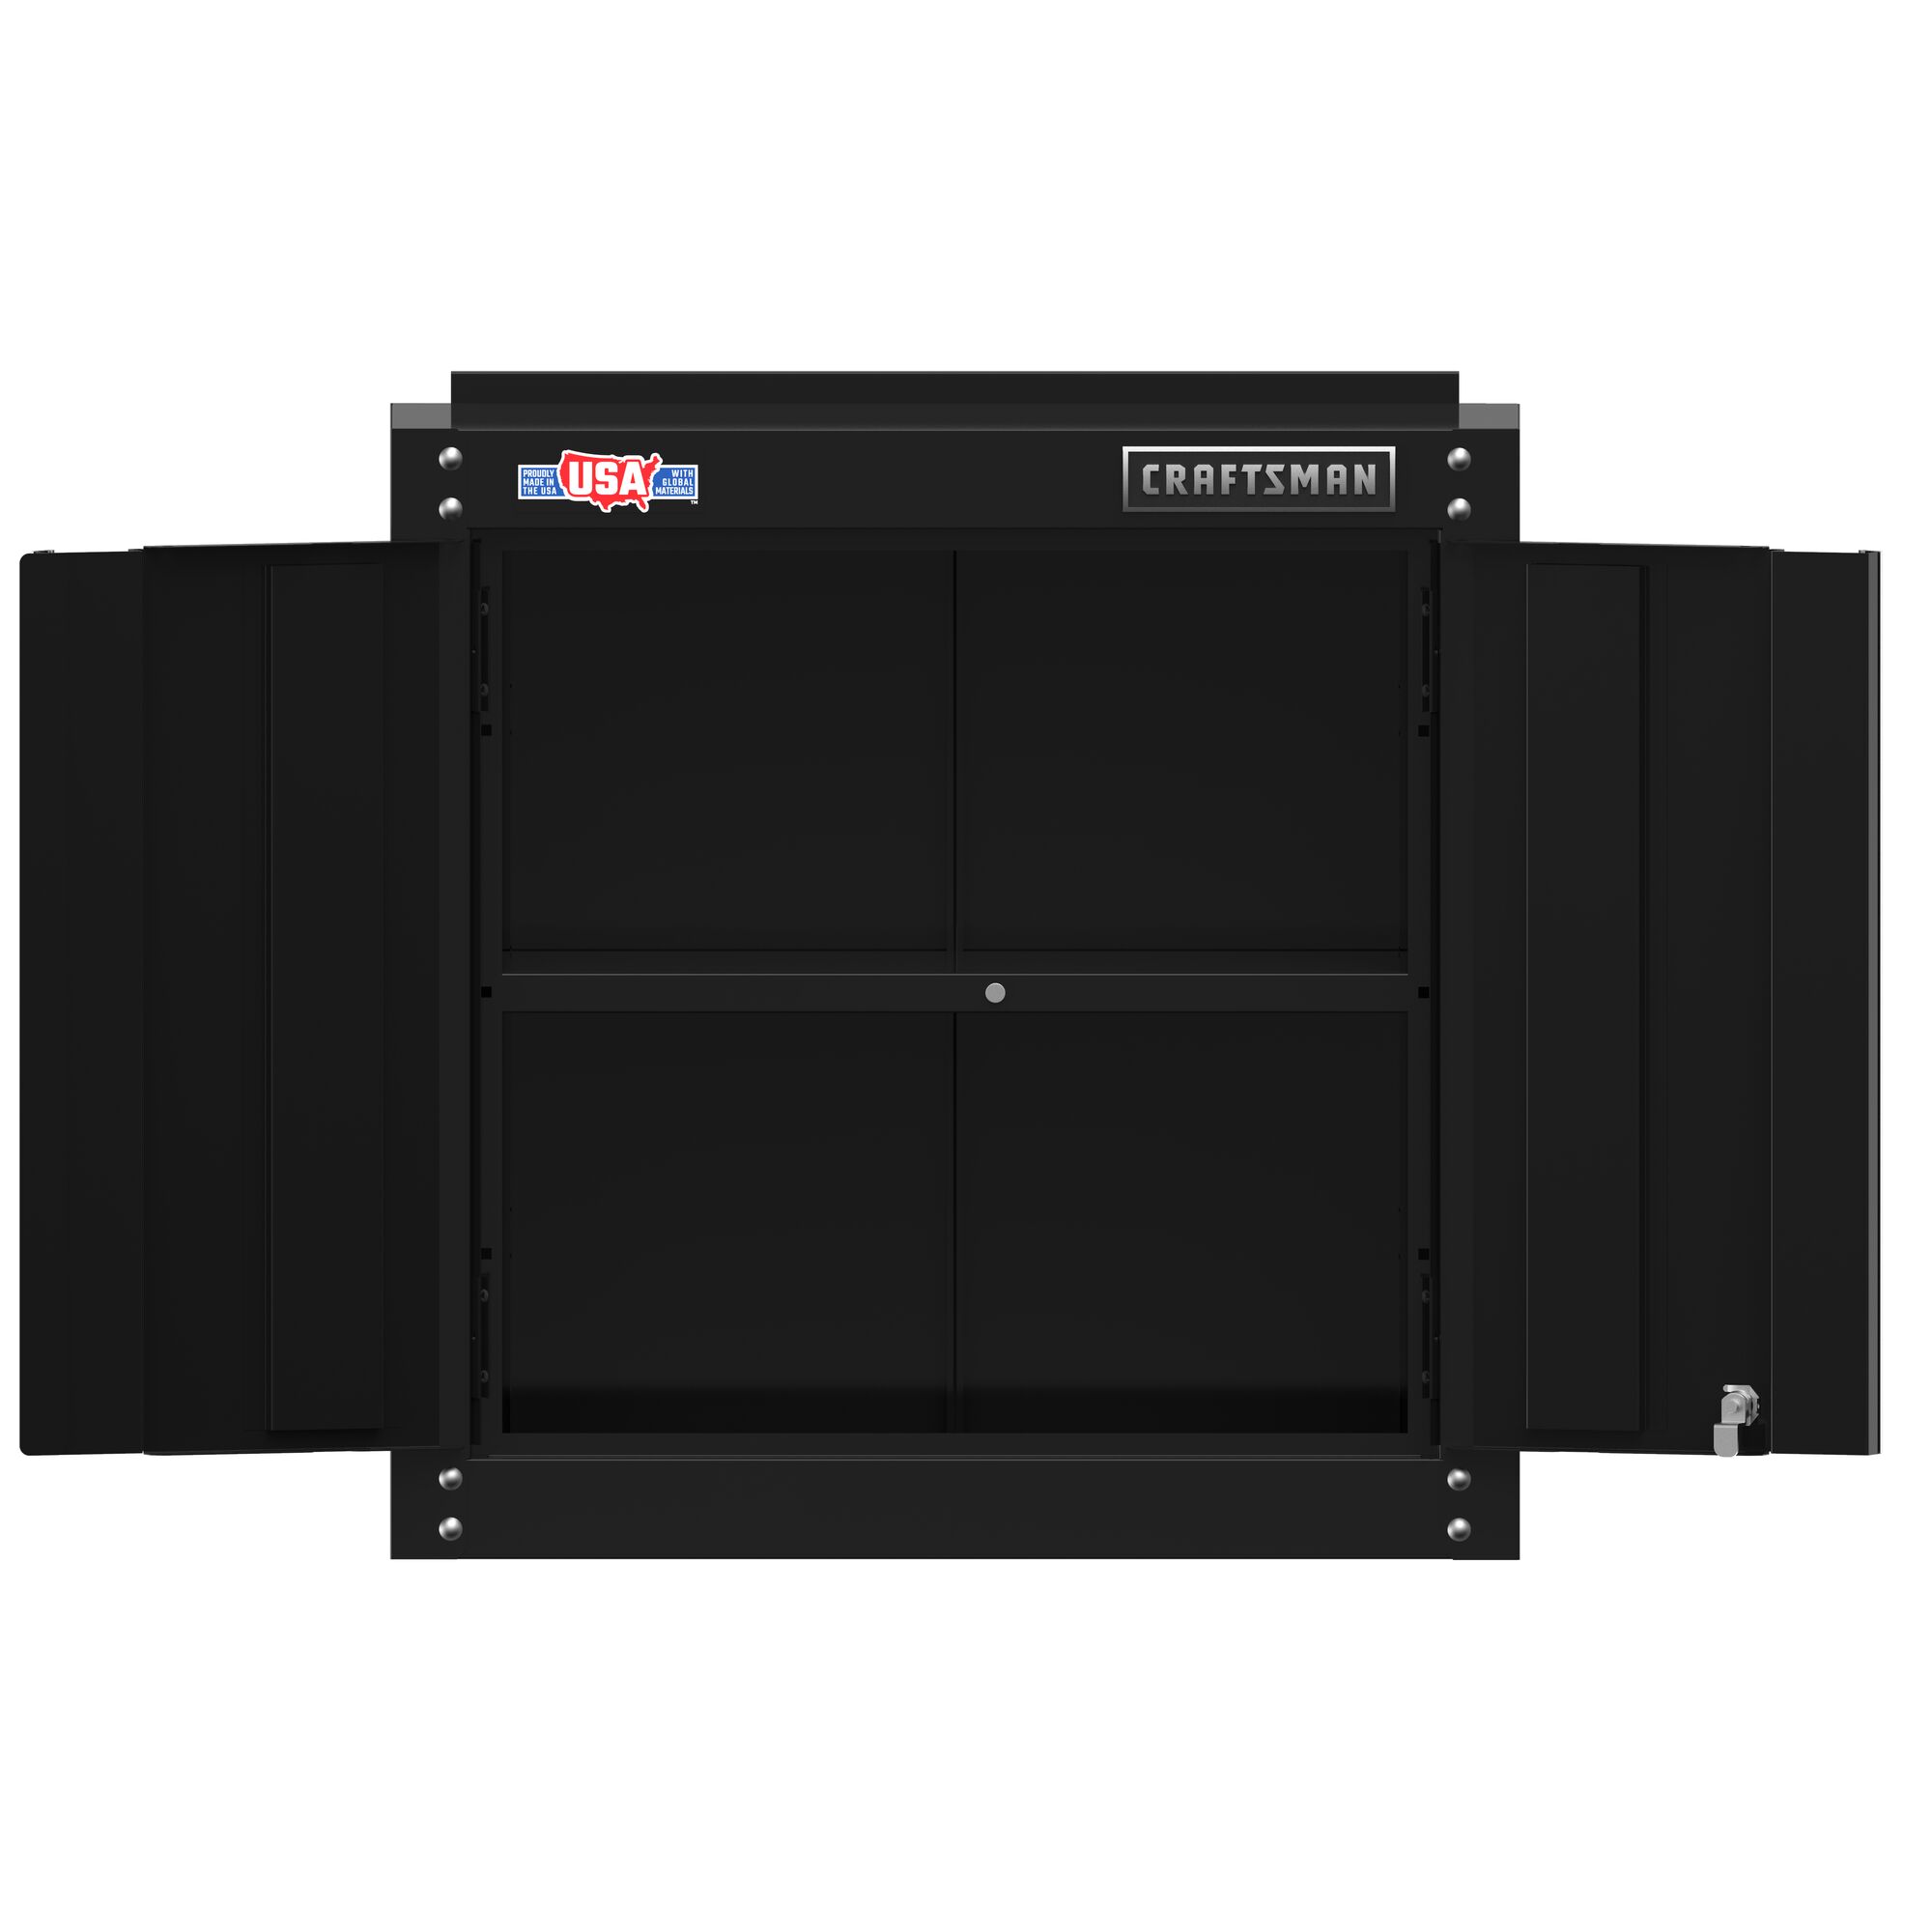 CRAFTSMAN 28-in wide by 28-in high storage wall cabinet straight forward view with doors open